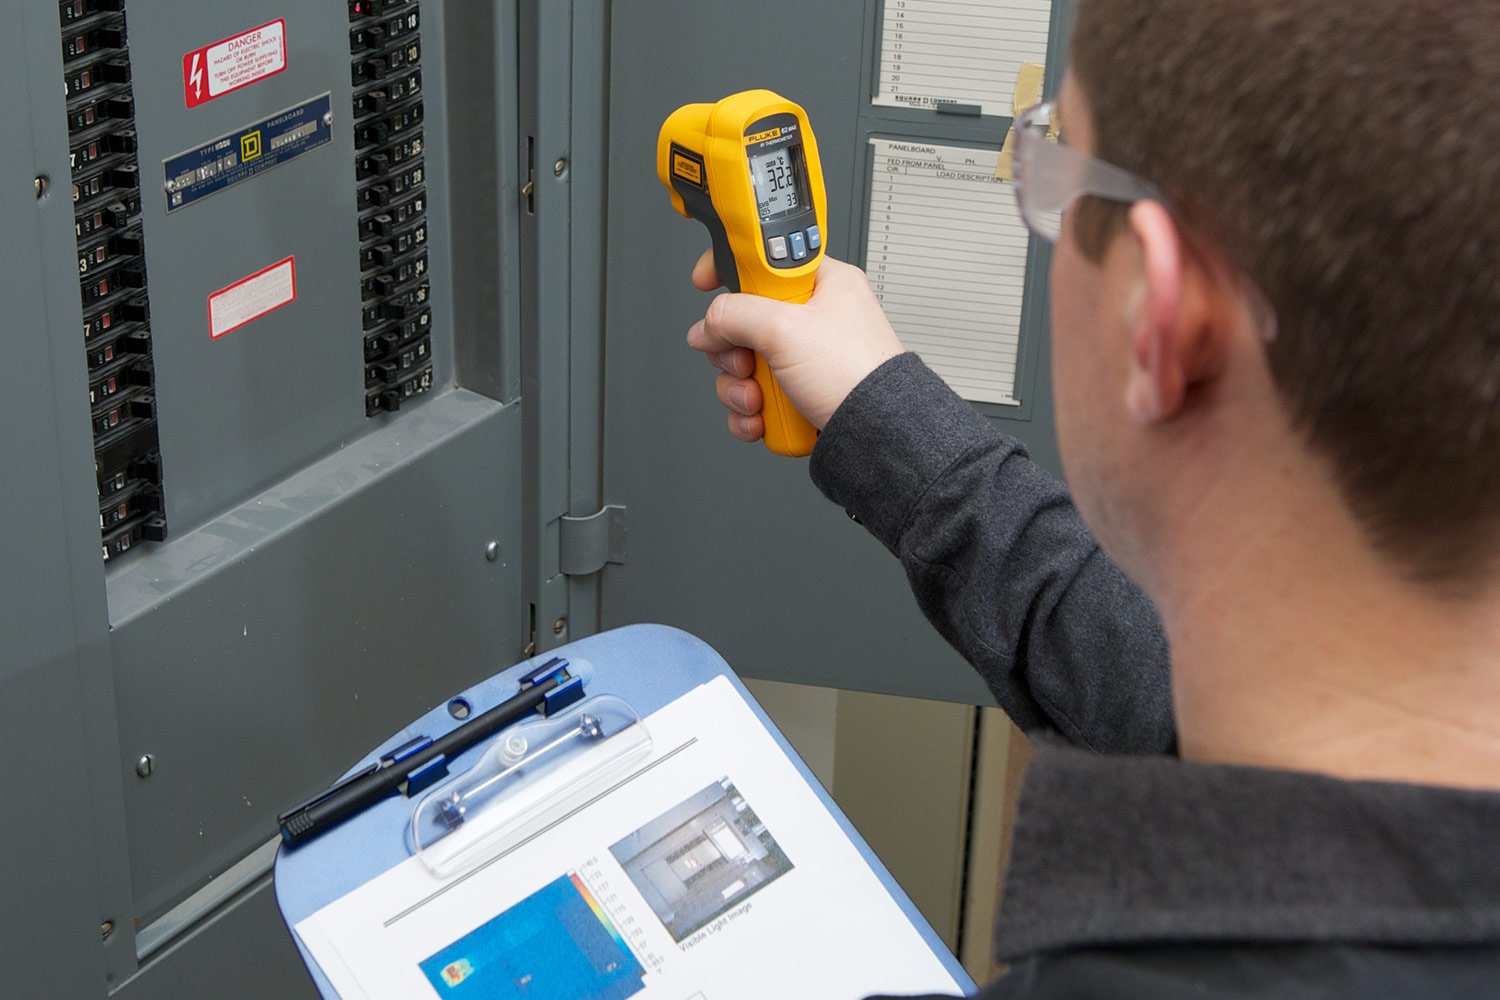 Non-Contact Infrared Thermometer: Reliable, Convenient, and Hassle-free  Temperature Measurement